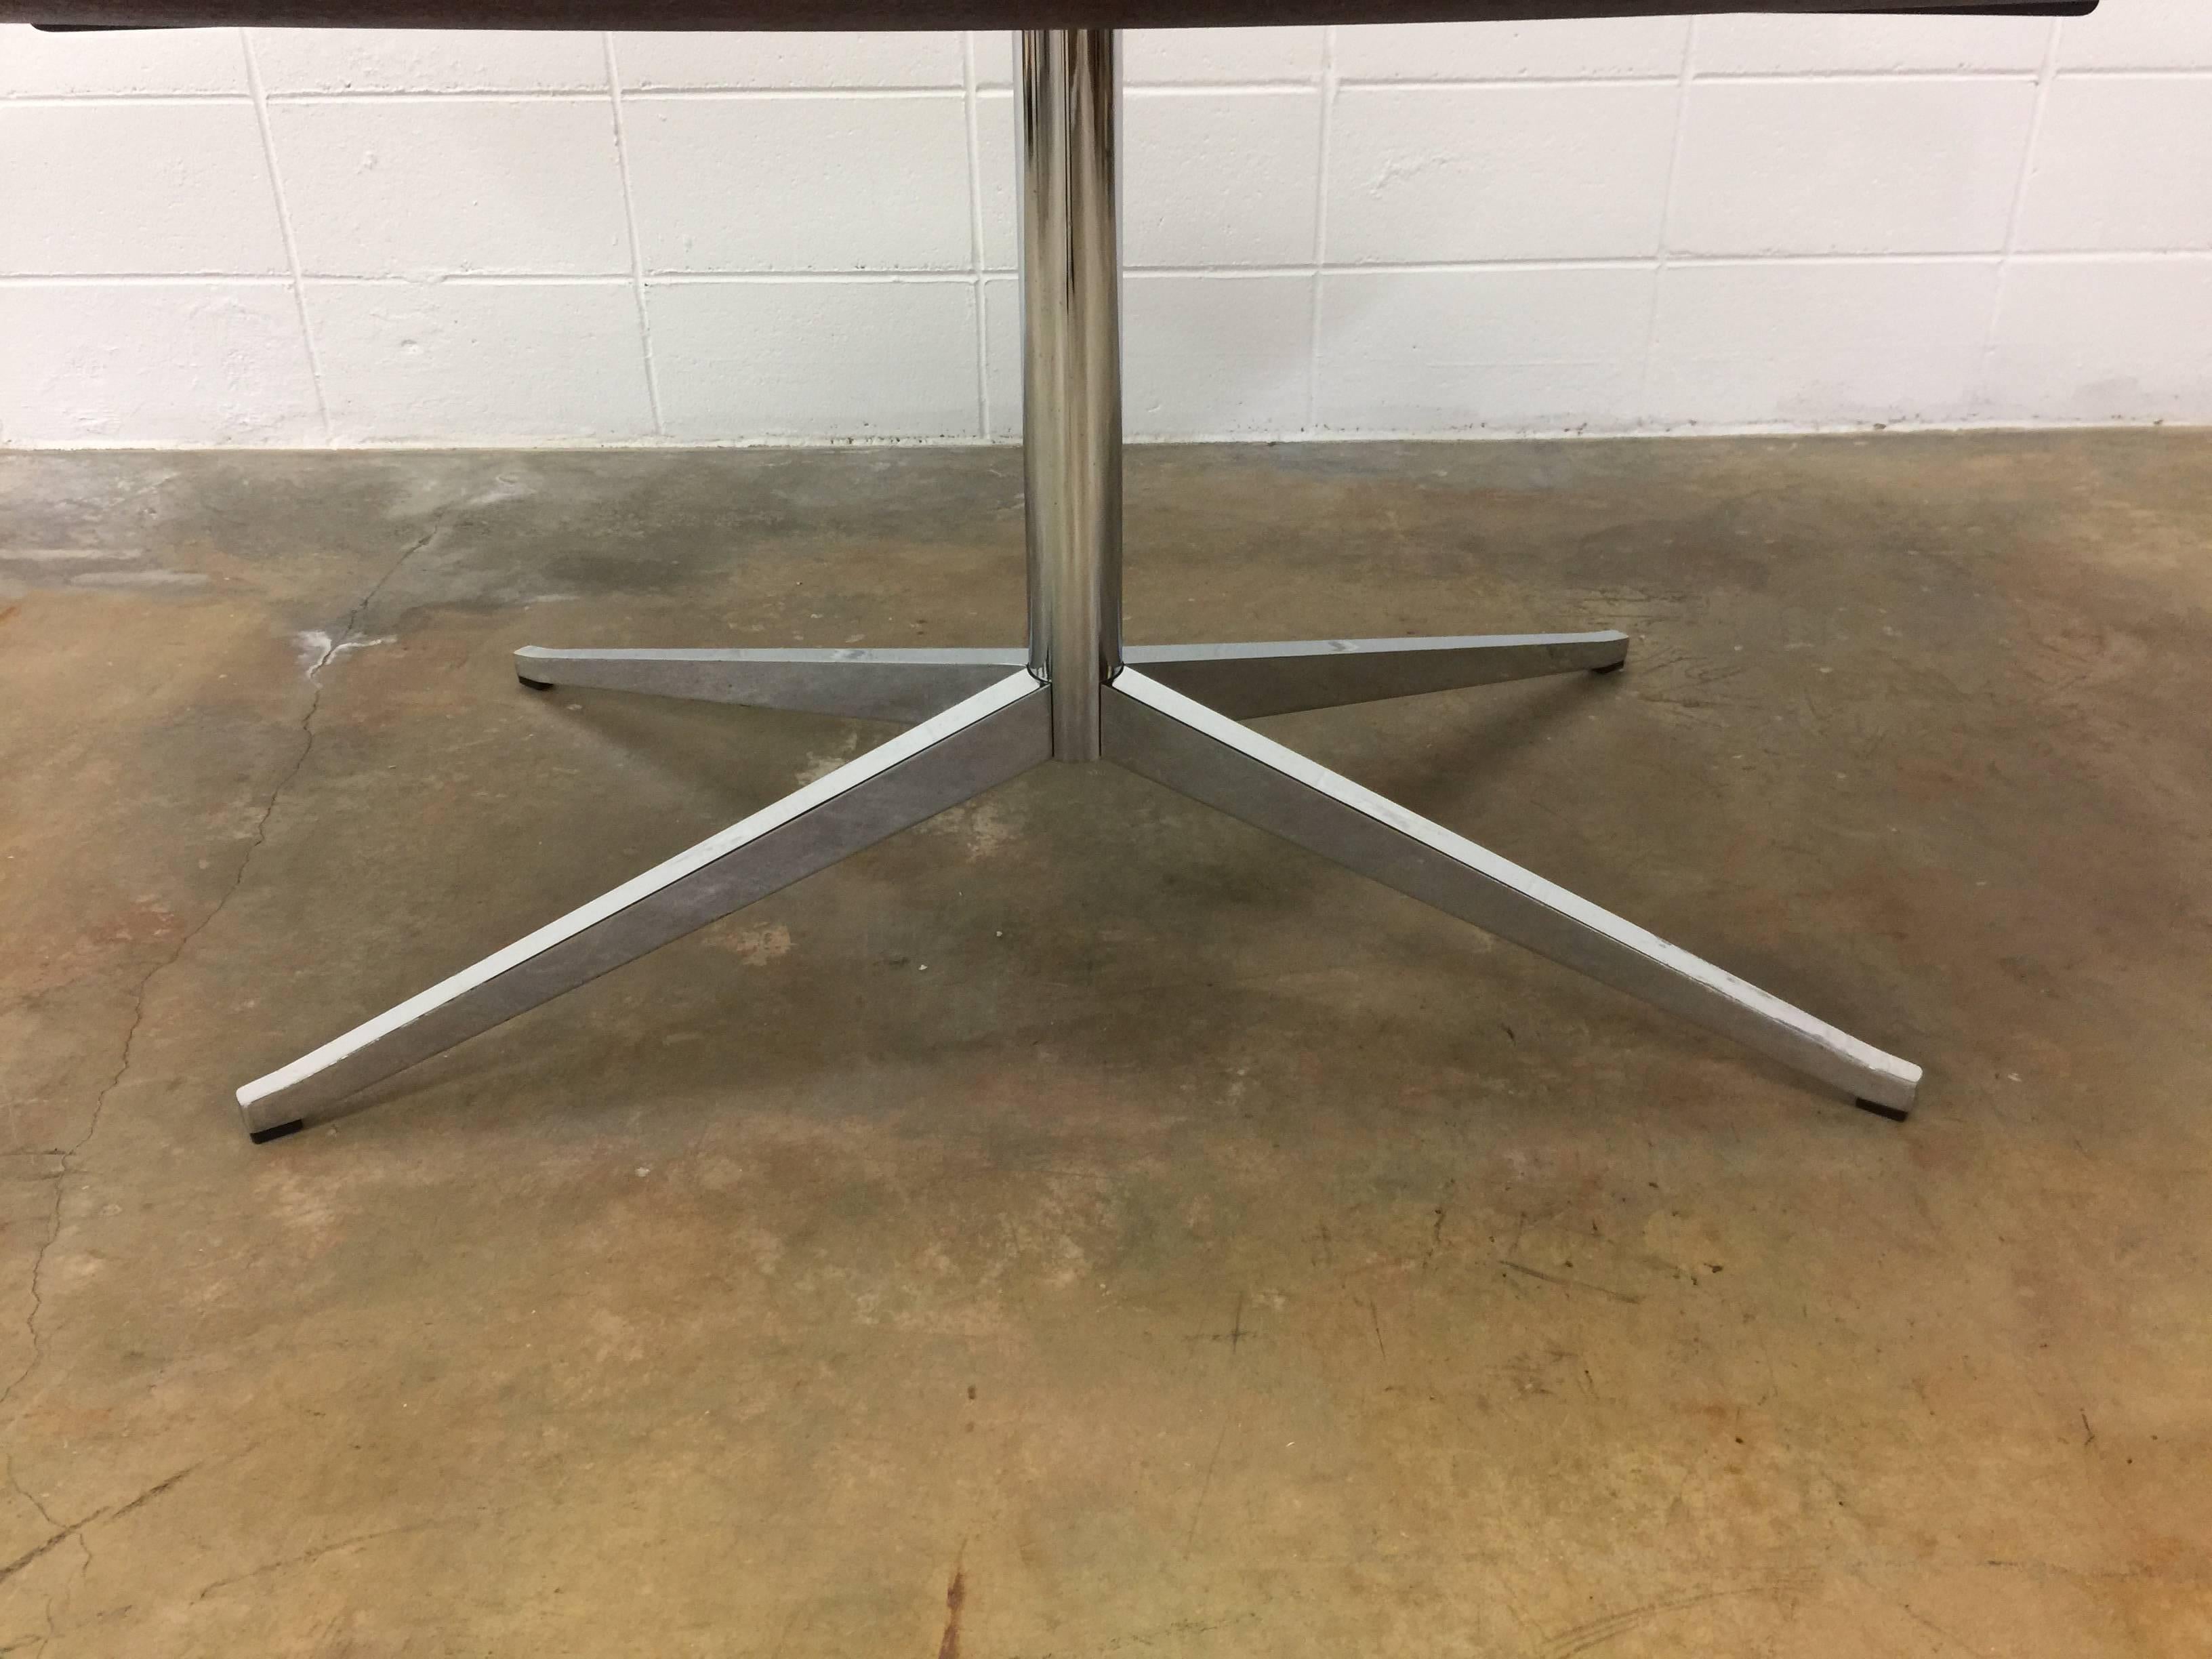 2480 pedestal table desk, circa 1961 for Knoll. 

Beautiful walnut and chrome table that can used as a desk or a dining table. Tabletop has been restored and looks great. Legs have some chrome finish loss. Those areas have been touched up to